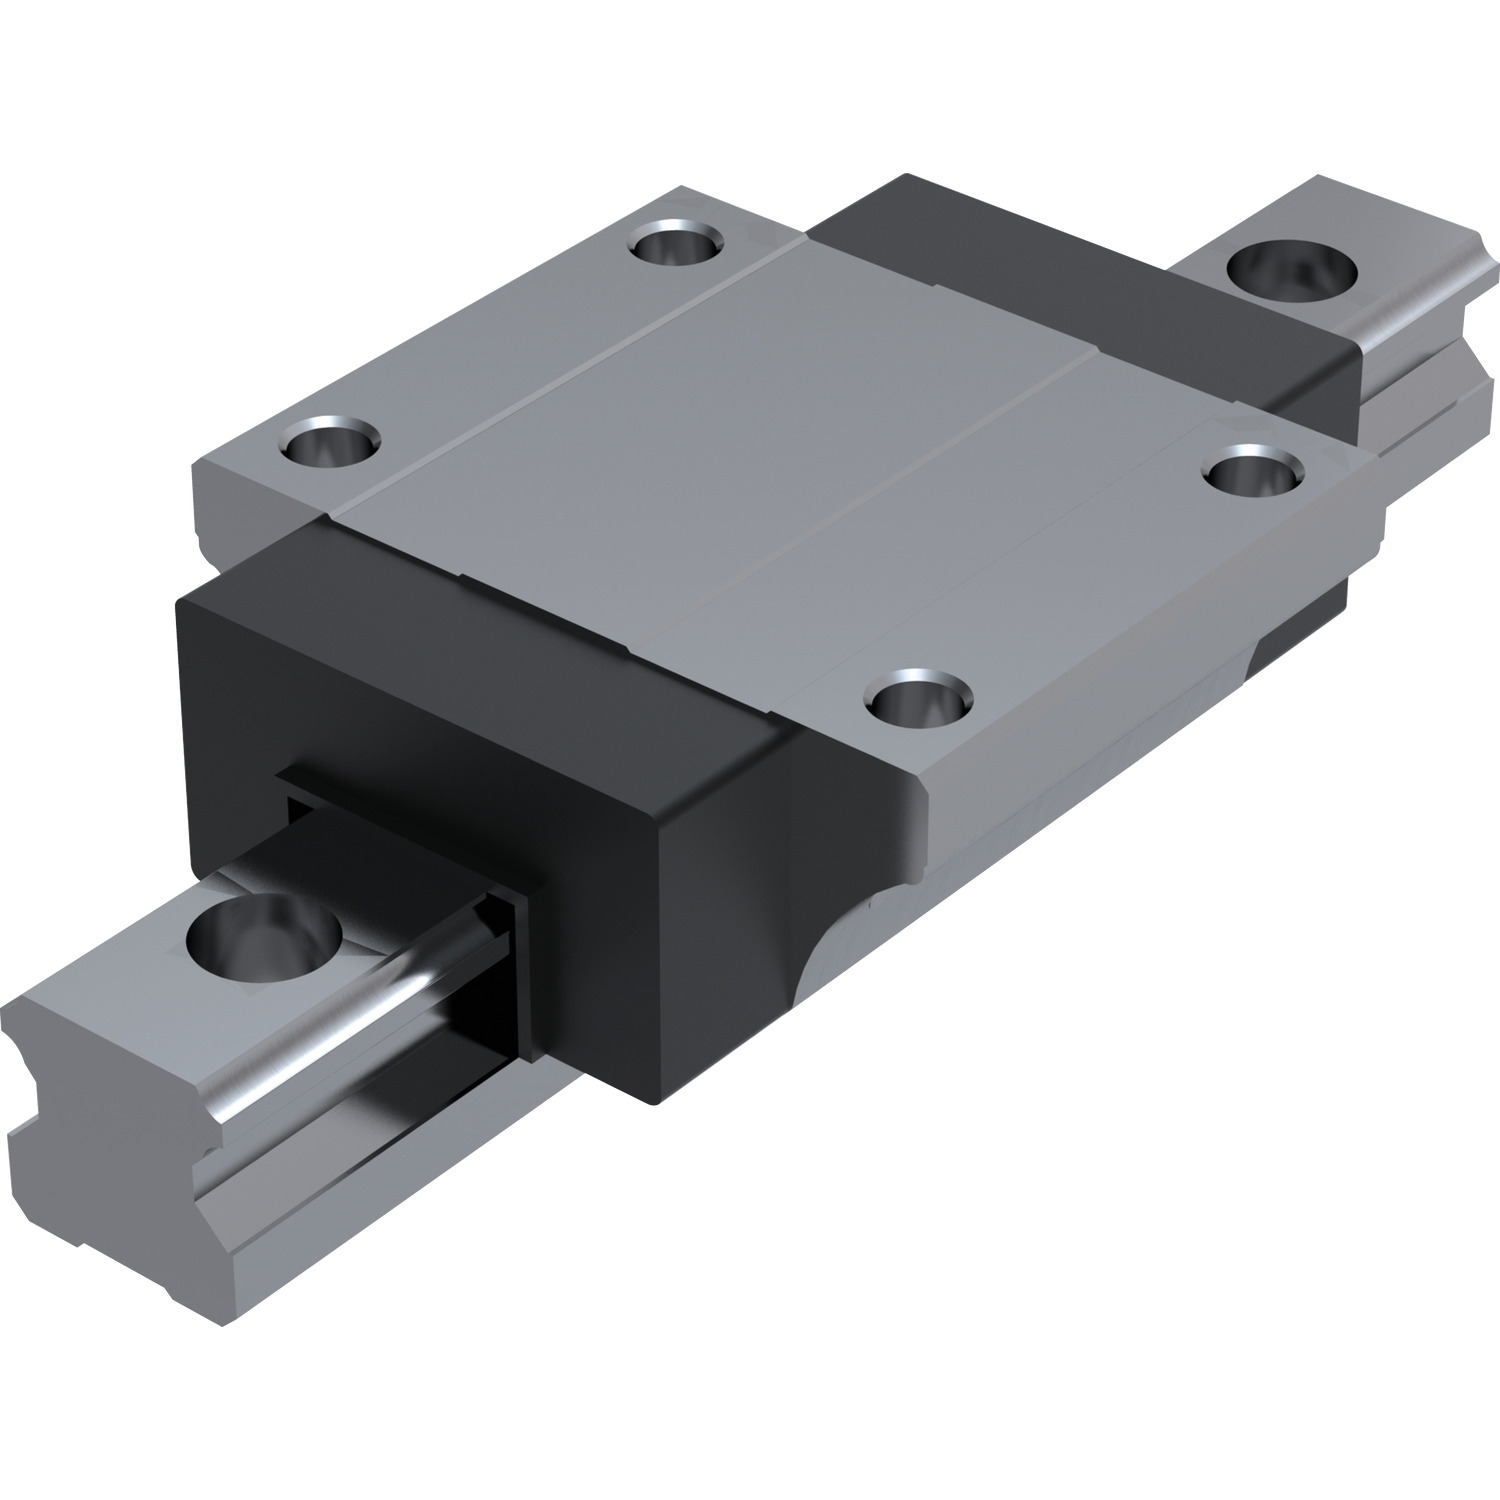 Linear Guideways Our most popular linear rail systems with either flanged or un-flanged carriages (L1016.F or L1016.U). Width sizes 15, 20, 25, 30, 35, 45 and 55mm. Lengths up to 4 metres and rear-fixing rails also stocked (L1016.RF). Ultra-low profile carriages also available (L1016.UL).